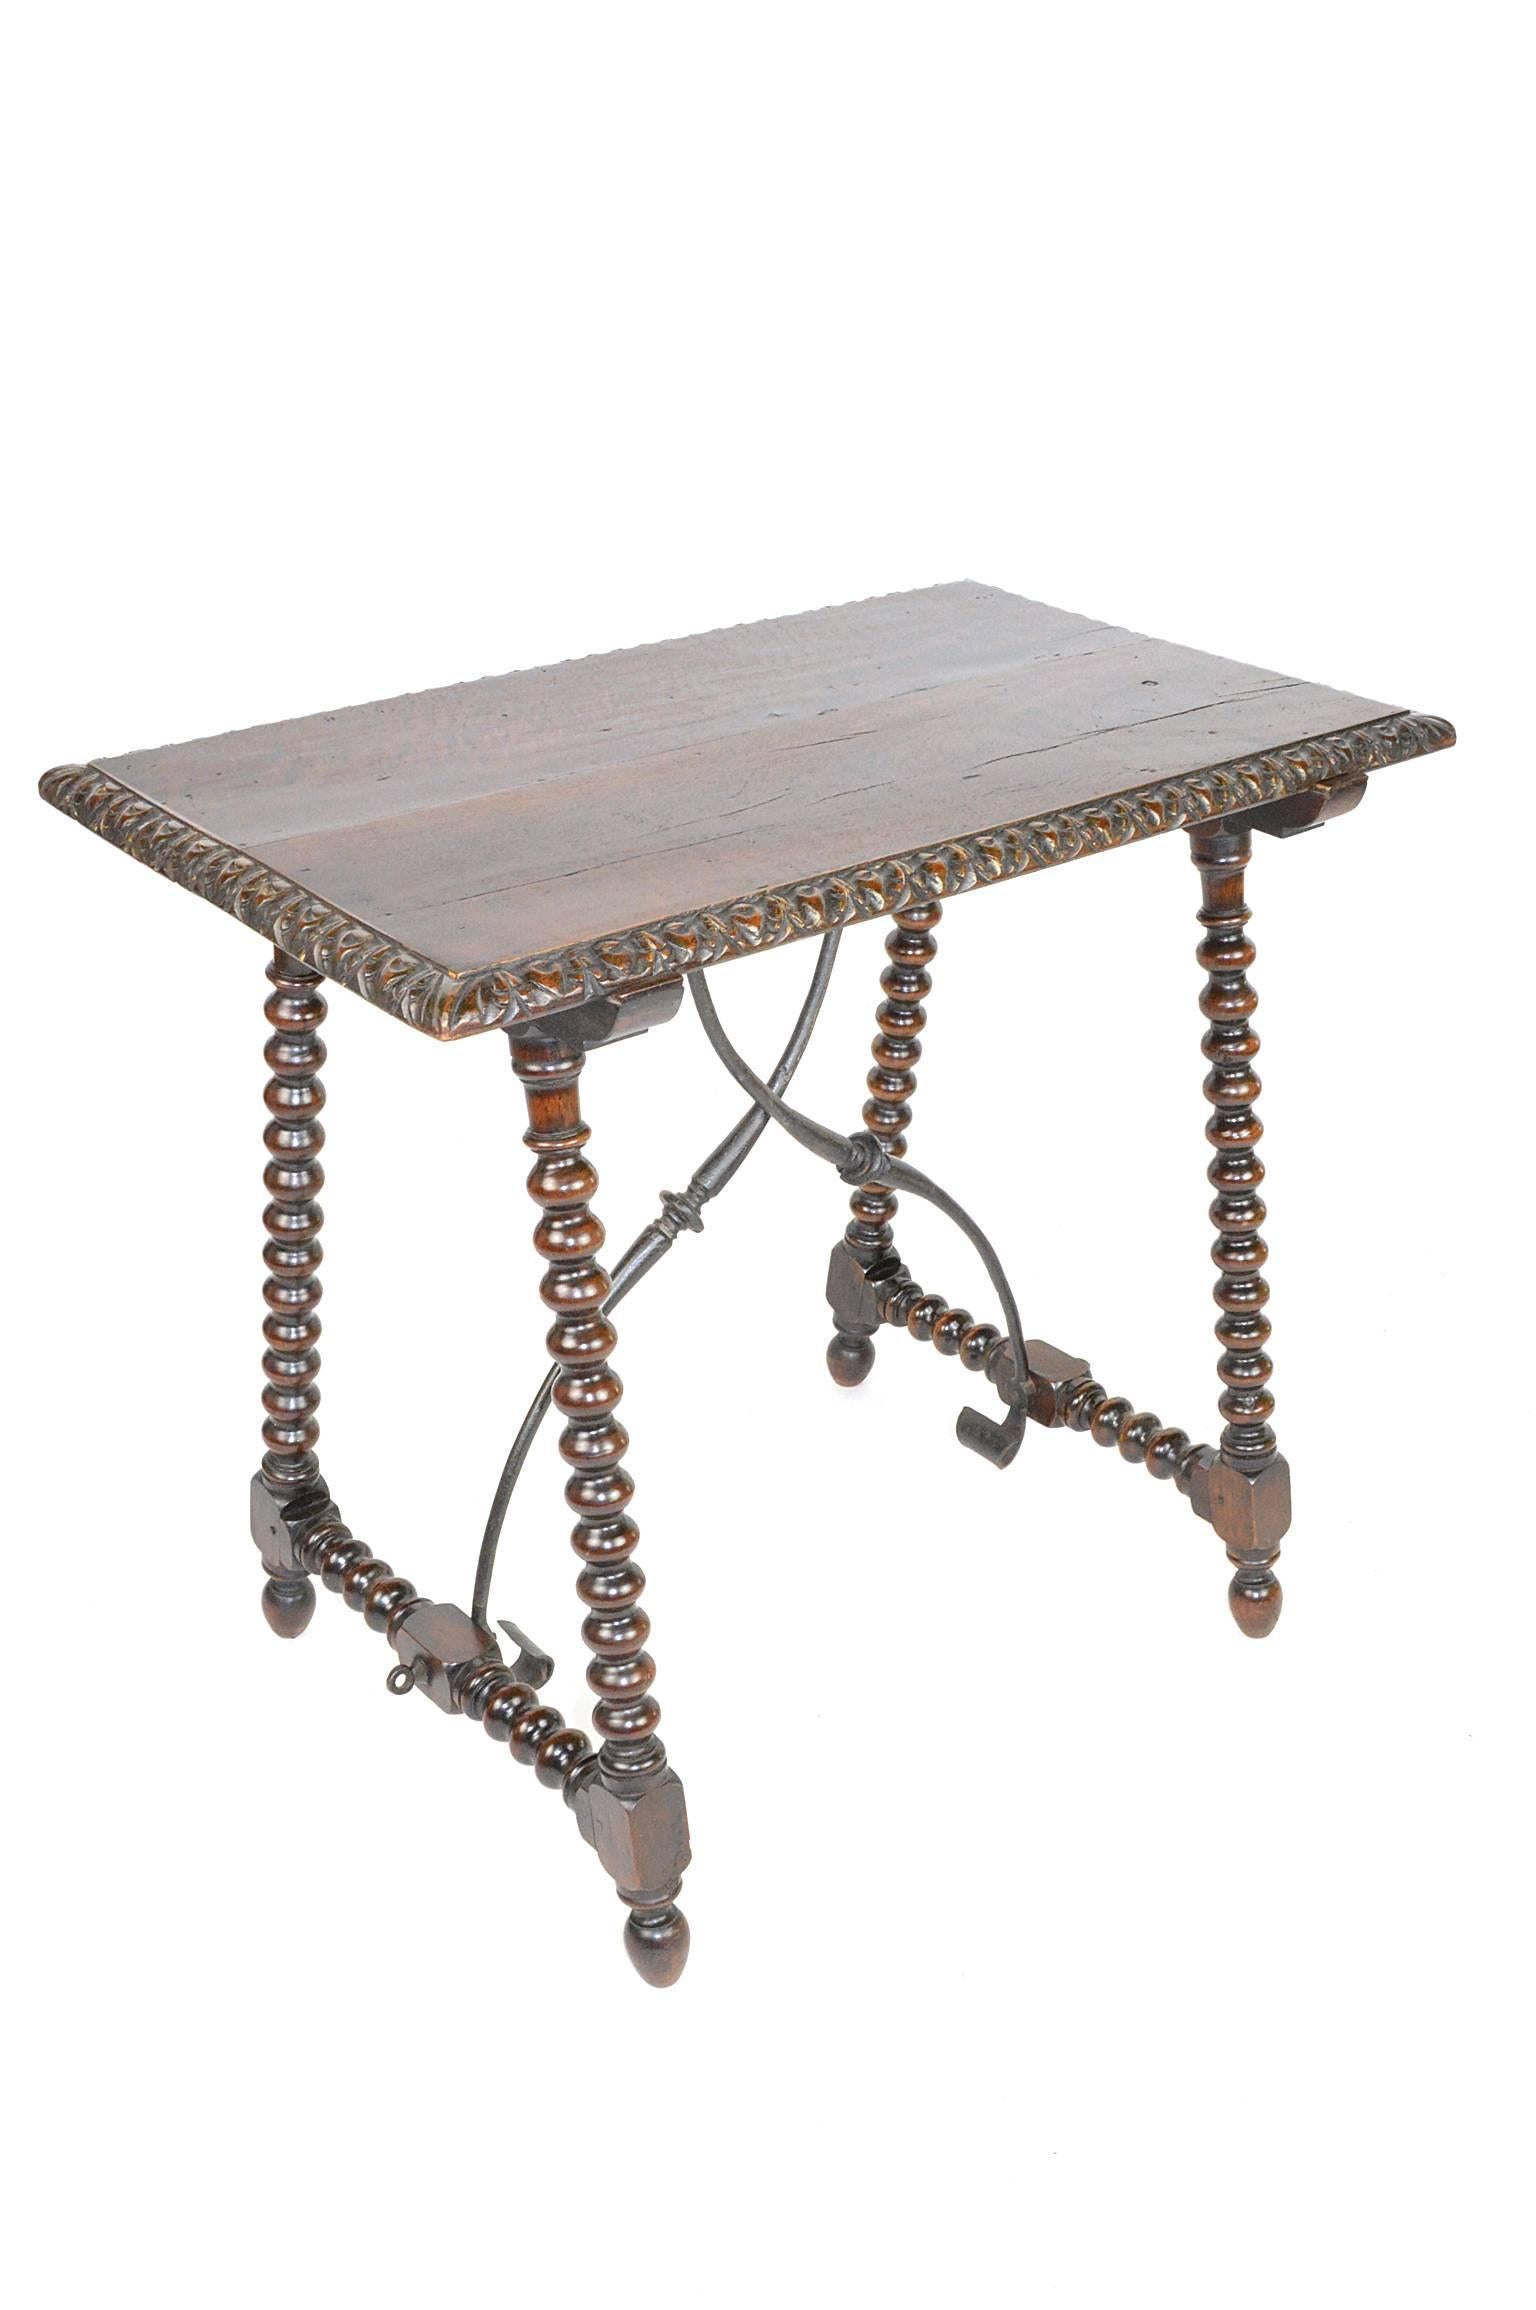 19th century Italian walnut trestle table with its base joined by a wrought iron stretcher and a rich warm patina.